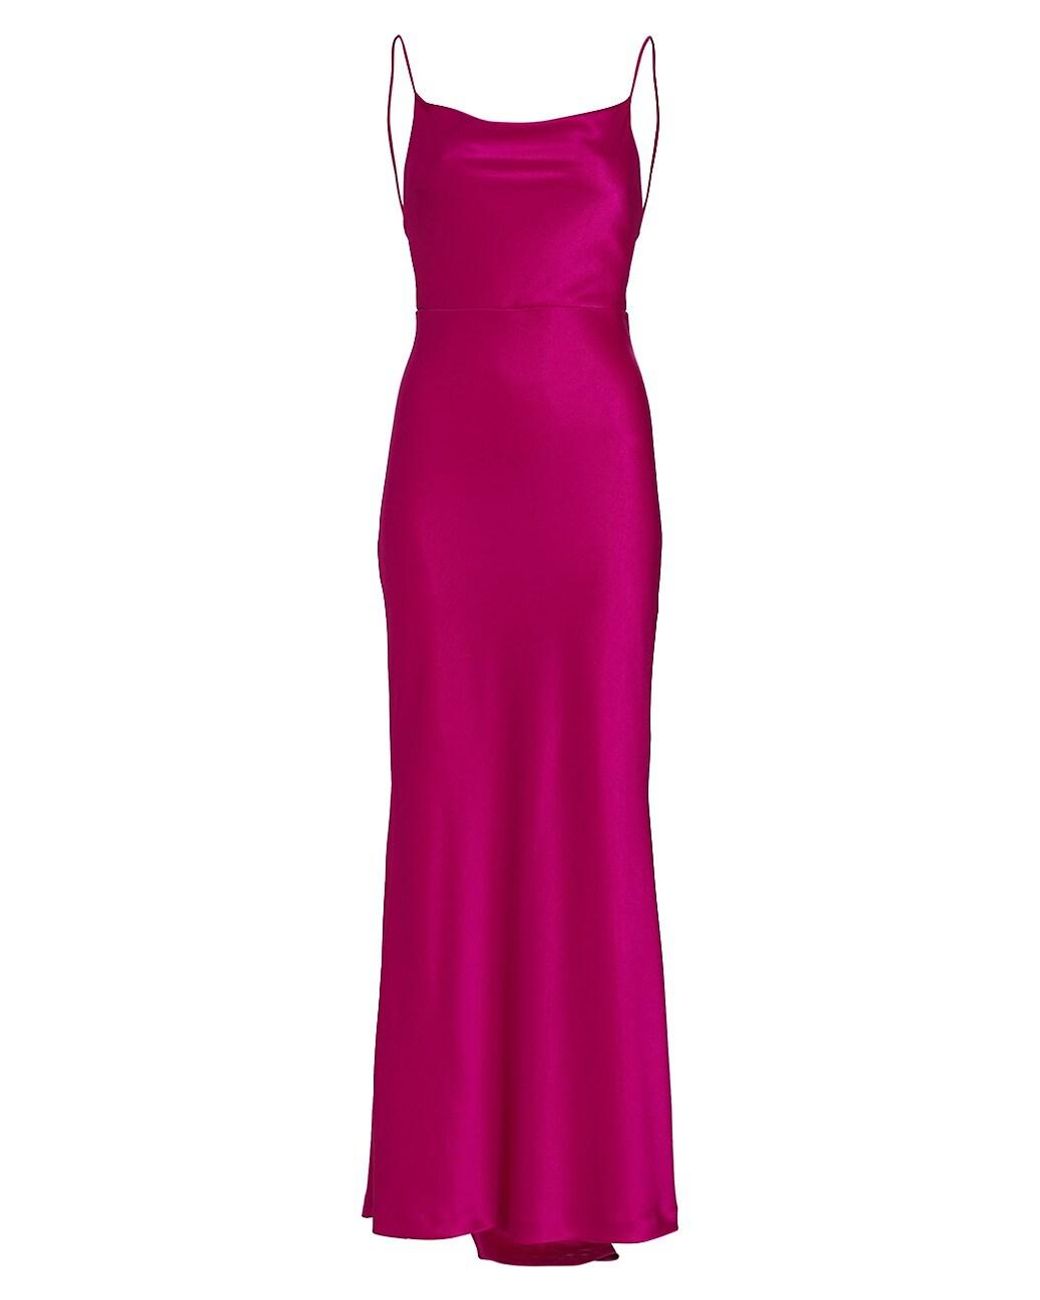 Alice + Olivia Montana Satin Cowlneck Gown in Raspberry (Pink) | Lyst